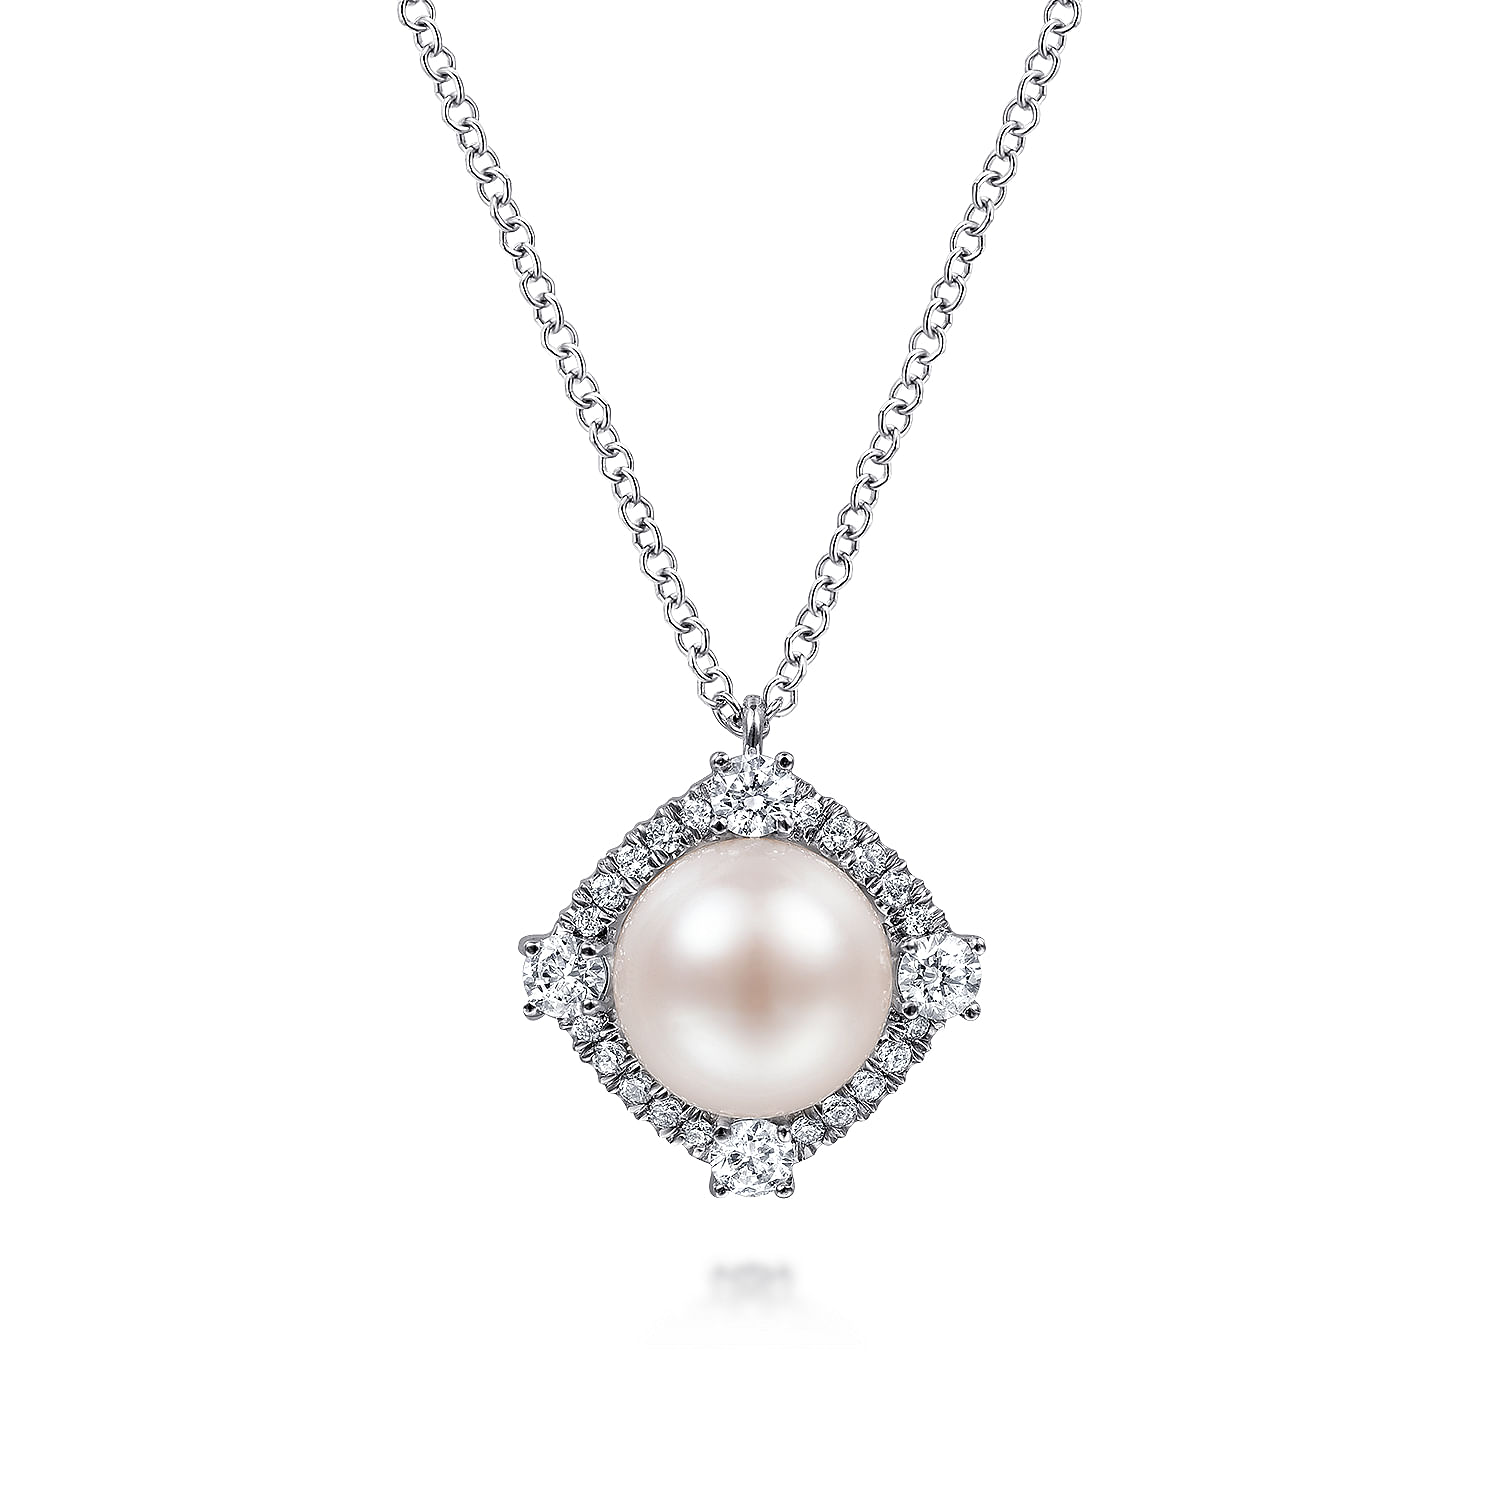 Gabriel - 14K White Gold Cultured Pearl Pendant Necklace with Diamond Halo